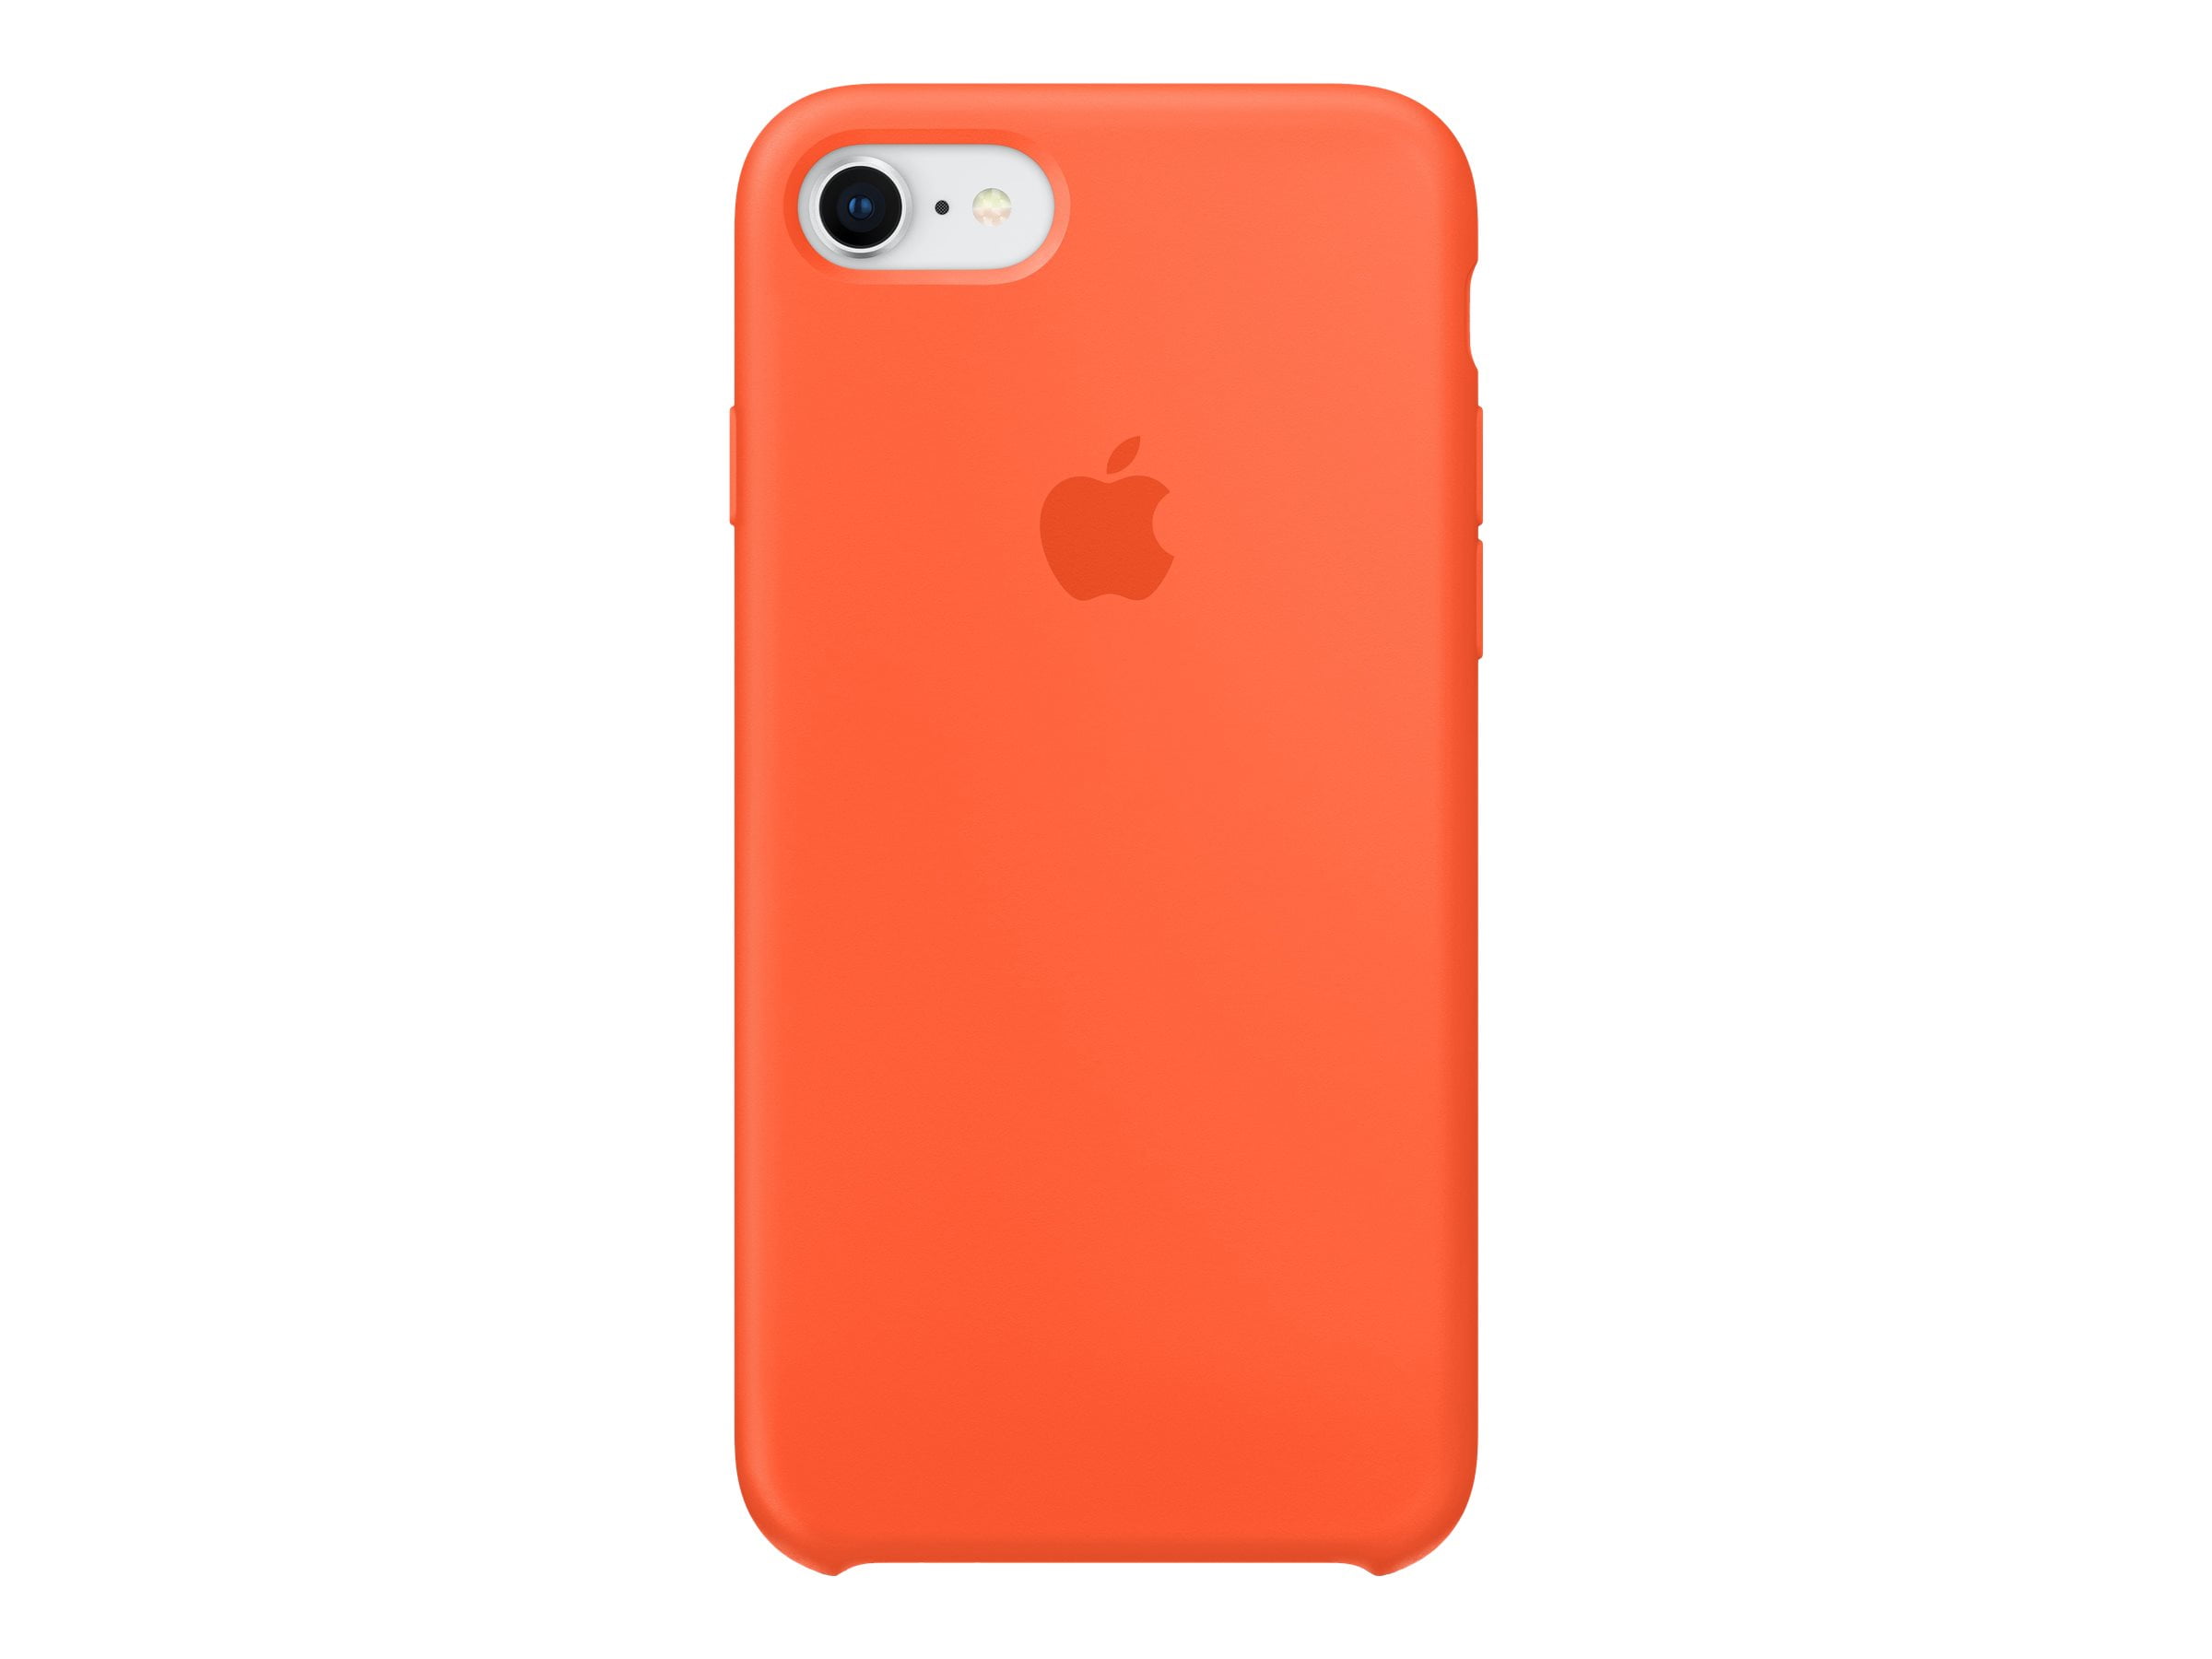 Persistence exhibition Specialize Apple Silicone Case for iPhone 8 & iPhone 7 - Spicy Orange - Walmart.com